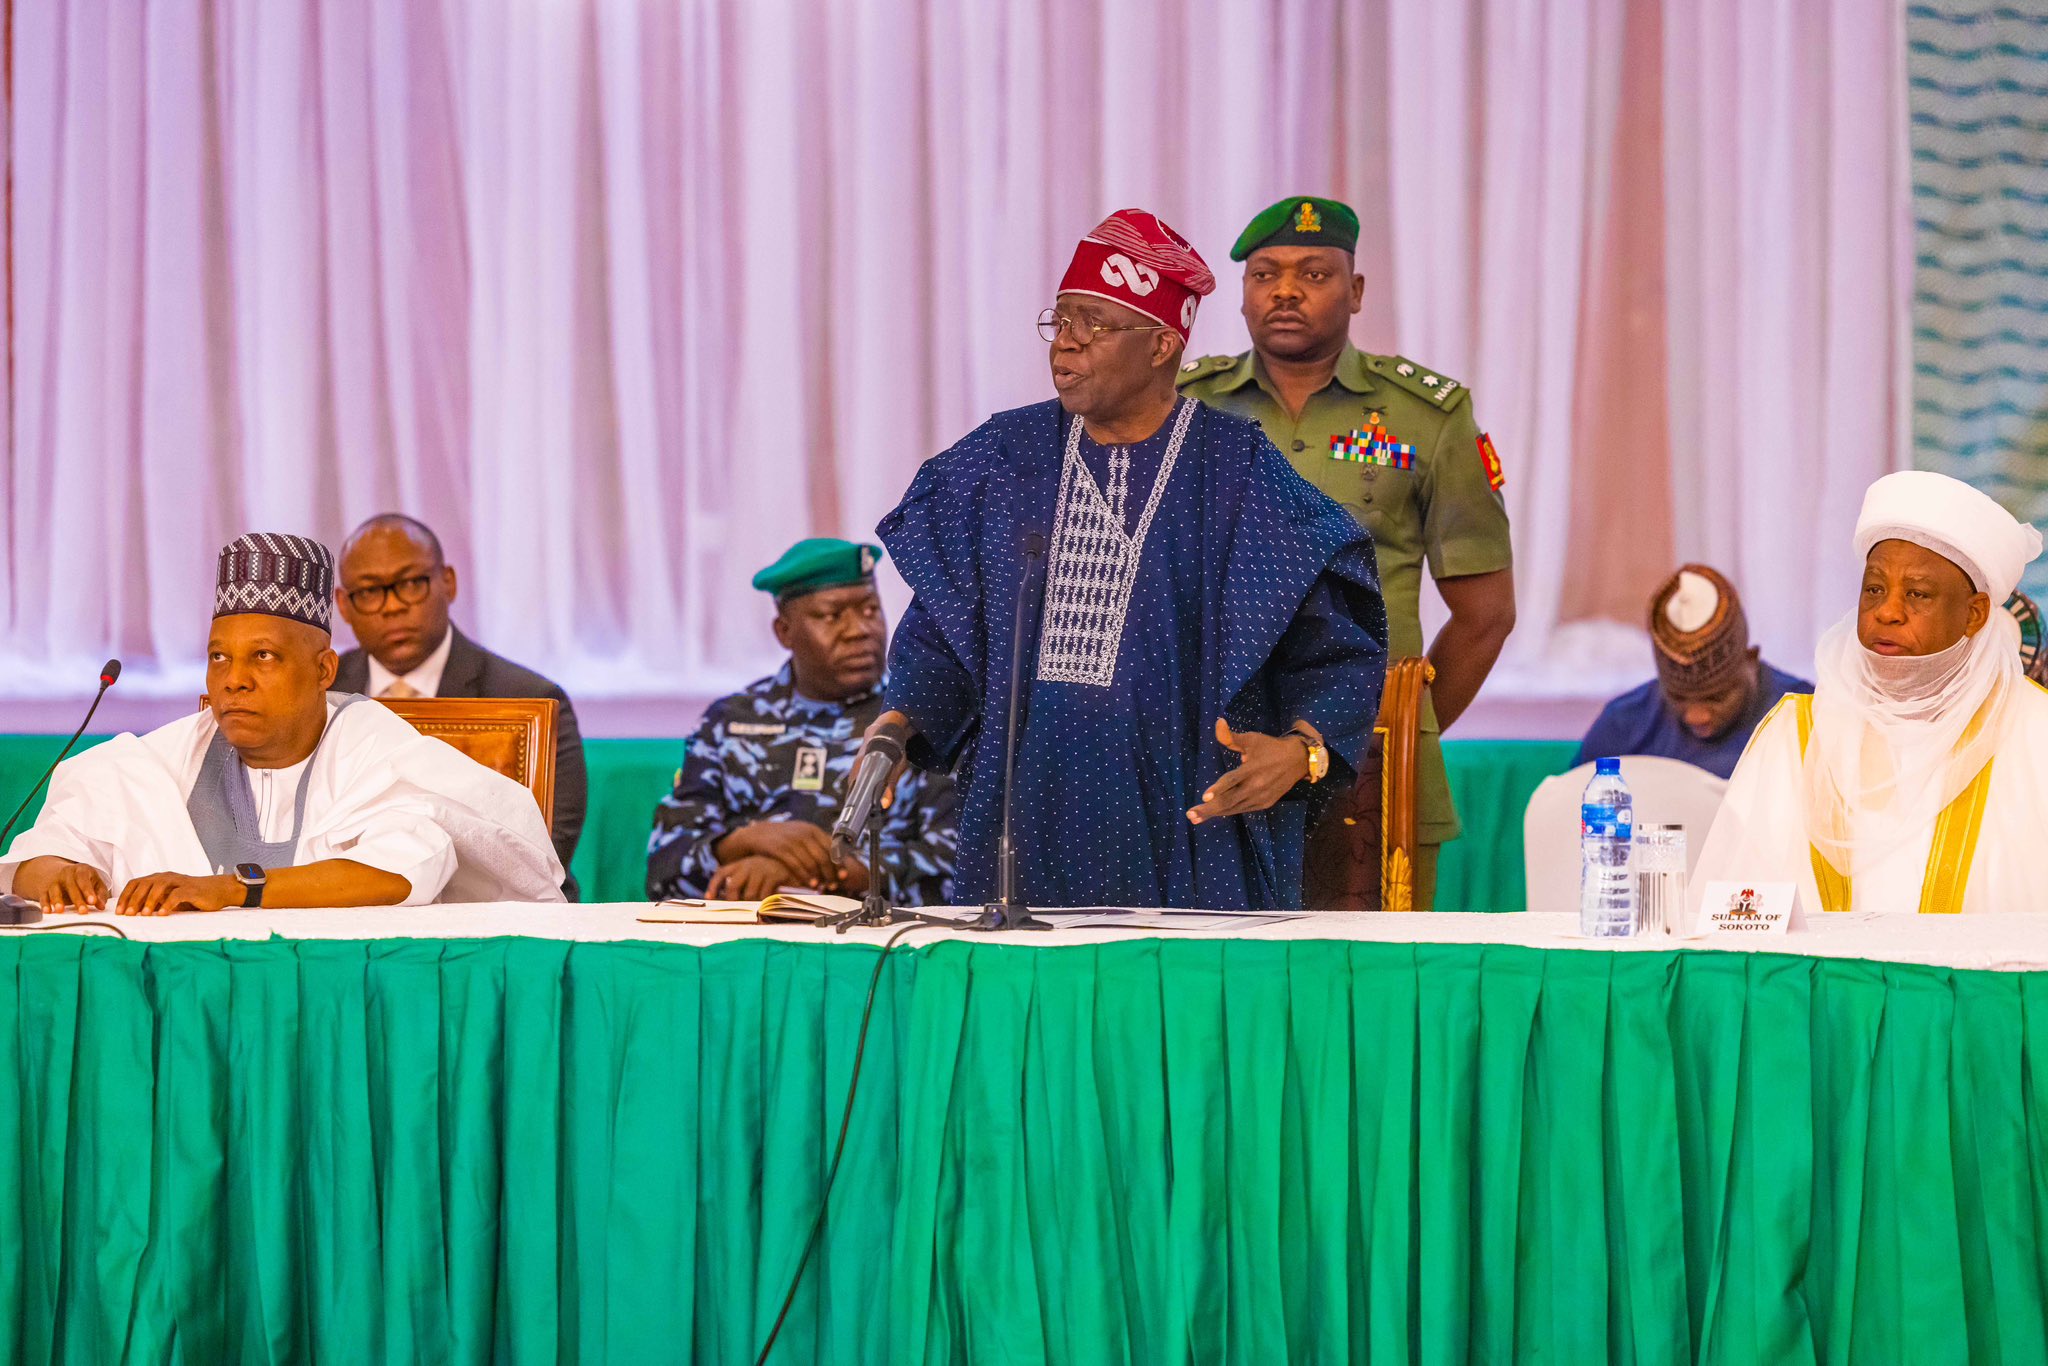 Why I Removed Fuel Subsidy - Tinubu Opens Up During Meeting With Traditional Rulers